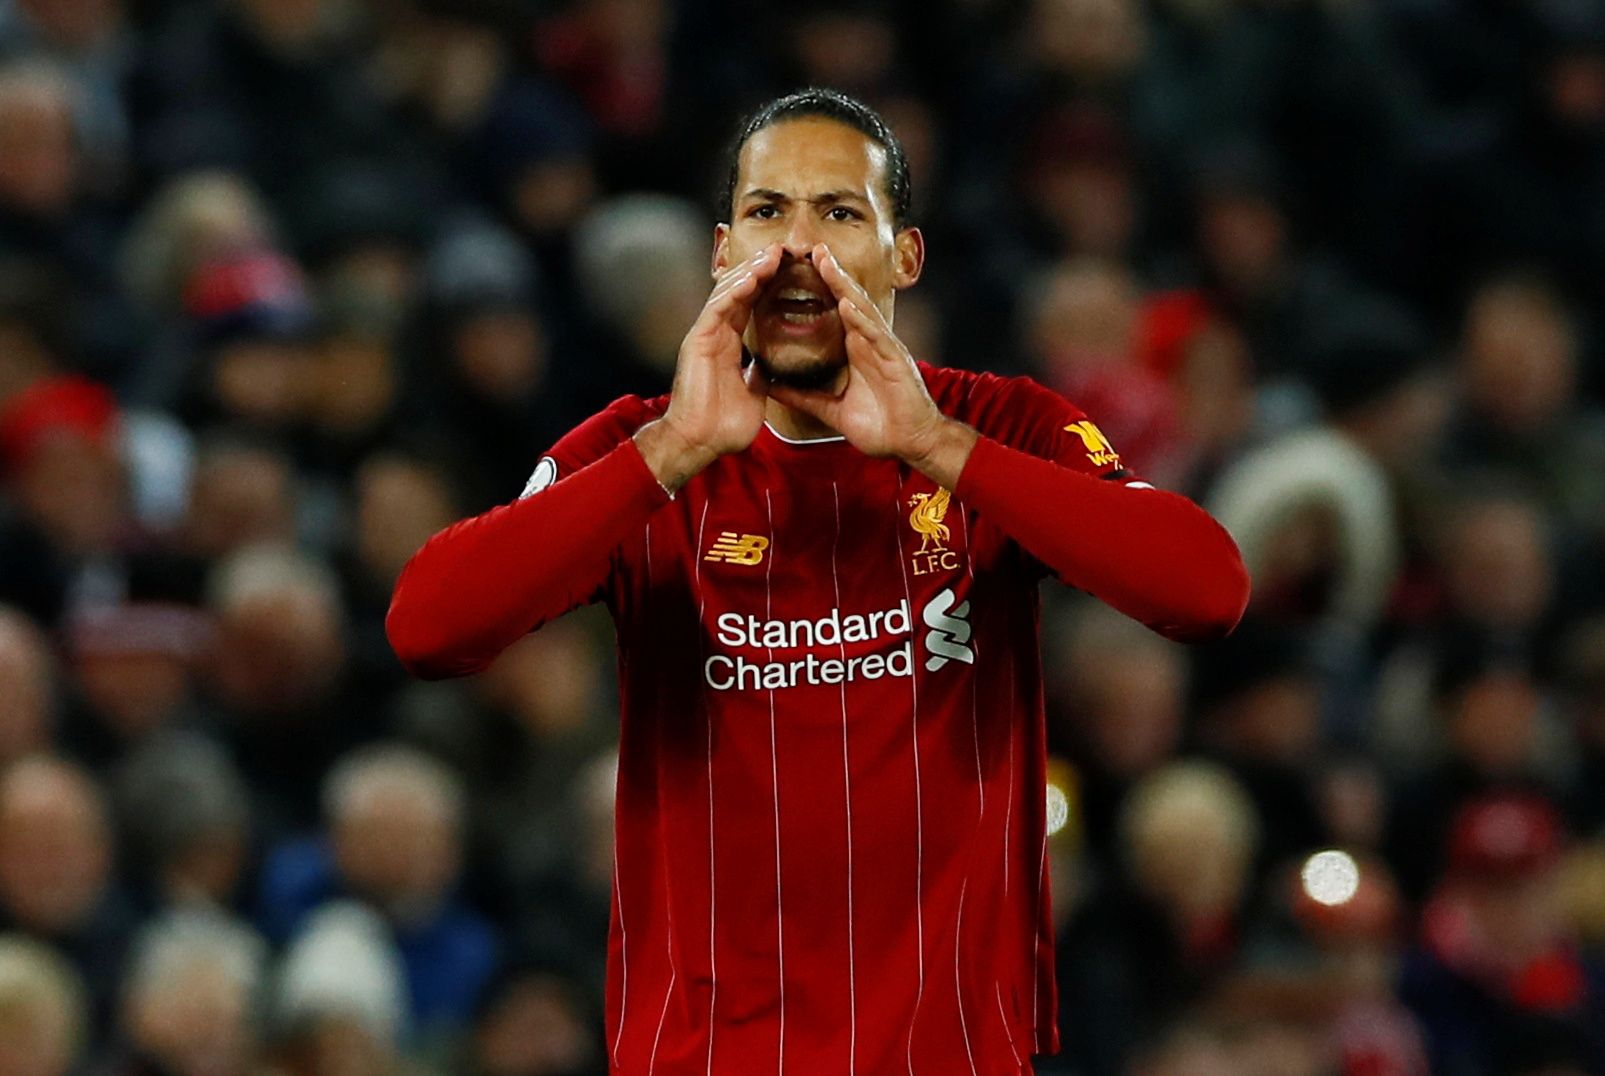 Soccer Football - Premier League - Liverpool v Brighton &amp; Hove Albion - Anfield, Liverpool, Britain - November 30, 2019 Liverpool's Virgil van Dijk reacts Action Images via Reuters/Jason Cairnduff  EDITORIAL USE ONLY. No use with unauthorized audio, video, data, fixture lists, club/league logos or 